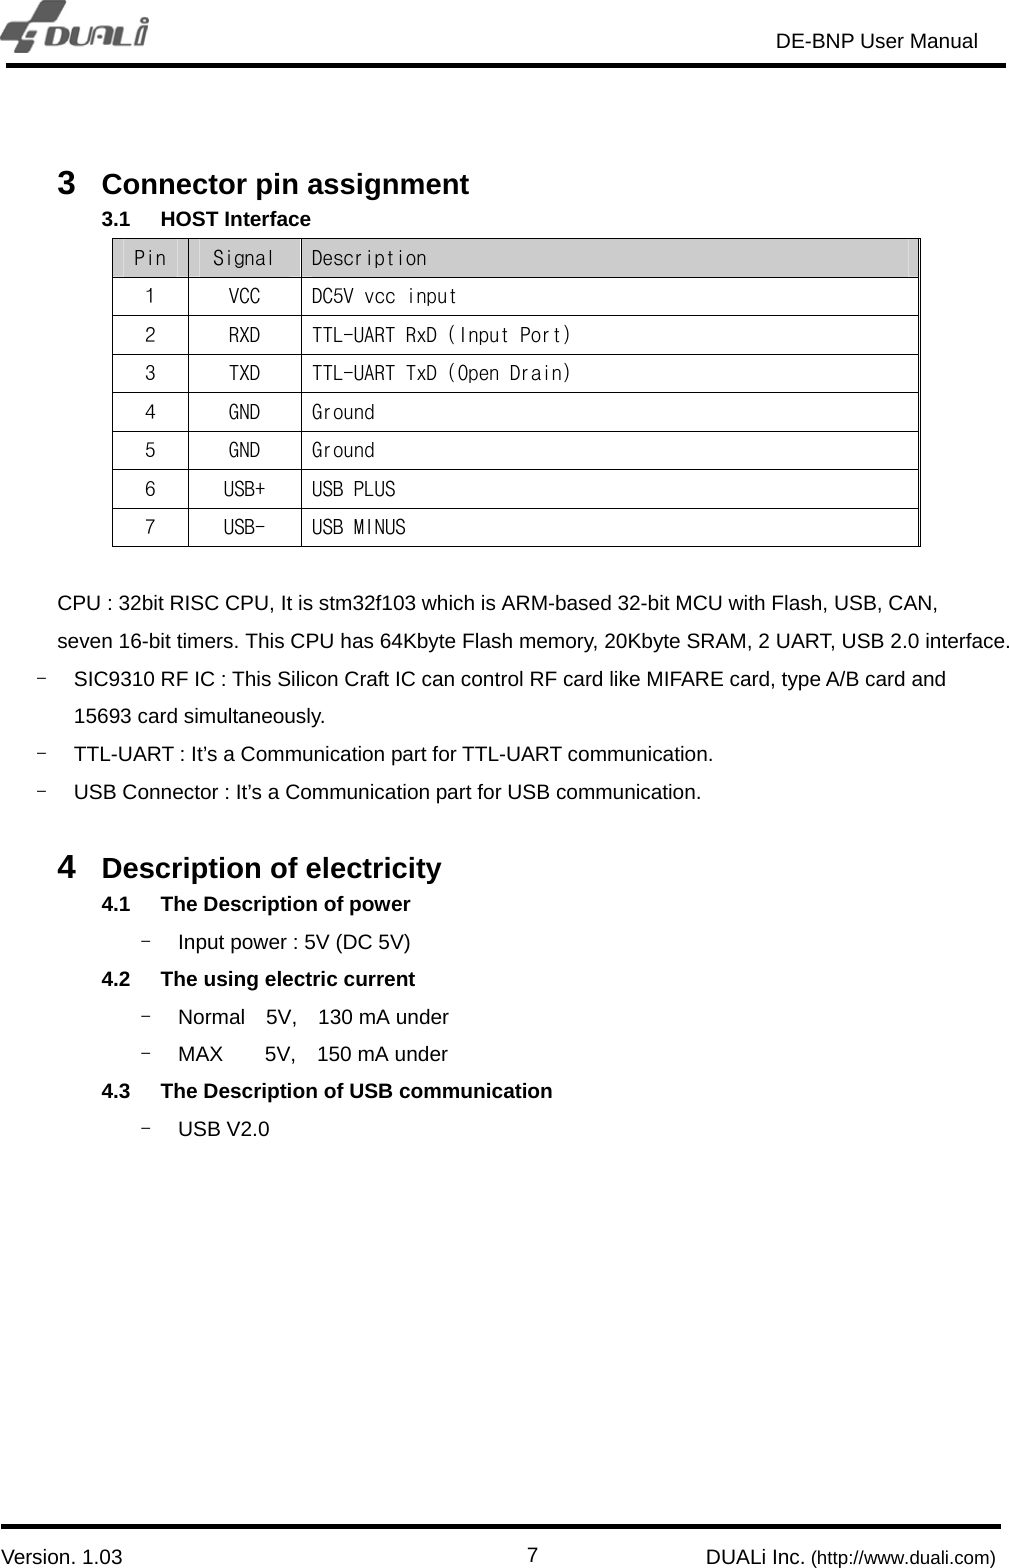                                                                       DE-BNP User Manual                            Version. 1.03                                                        DUALi Inc. (http://www.duali.com)  7 3  Connector pin assignment 3.1 HOST Interface Pin  Signal  Description 1  VCC  DC5V vcc input 2  RXD  TTL-UART RxD (Input Port) 3  TXD  TTL-UART TxD (Open Drain) 4  GND  Ground 5  GND  Ground 6  USB+  USB PLUS  7  USB-  USB MINUS   CPU : 32bit RISC CPU, It is stm32f103 which is ARM-based 32-bit MCU with Flash, USB, CAN, seven 16-bit timers. This CPU has 64Kbyte Flash memory, 20Kbyte SRAM, 2 UART, USB 2.0 interface. -  SIC9310 RF IC : This Silicon Craft IC can control RF card like MIFARE card, type A/B card and 15693 card simultaneously.   -  TTL-UART : It’s a Communication part for TTL-UART communication. -  USB Connector : It’s a Communication part for USB communication.    4  Description of electricity 4.1  The Description of power -  Input power : 5V (DC 5V) 4.2  The using electric current -  Normal  5V,  130 mA under -  MAX    5V,  150 mA under 4.3  The Description of USB communication - USB V2.0  